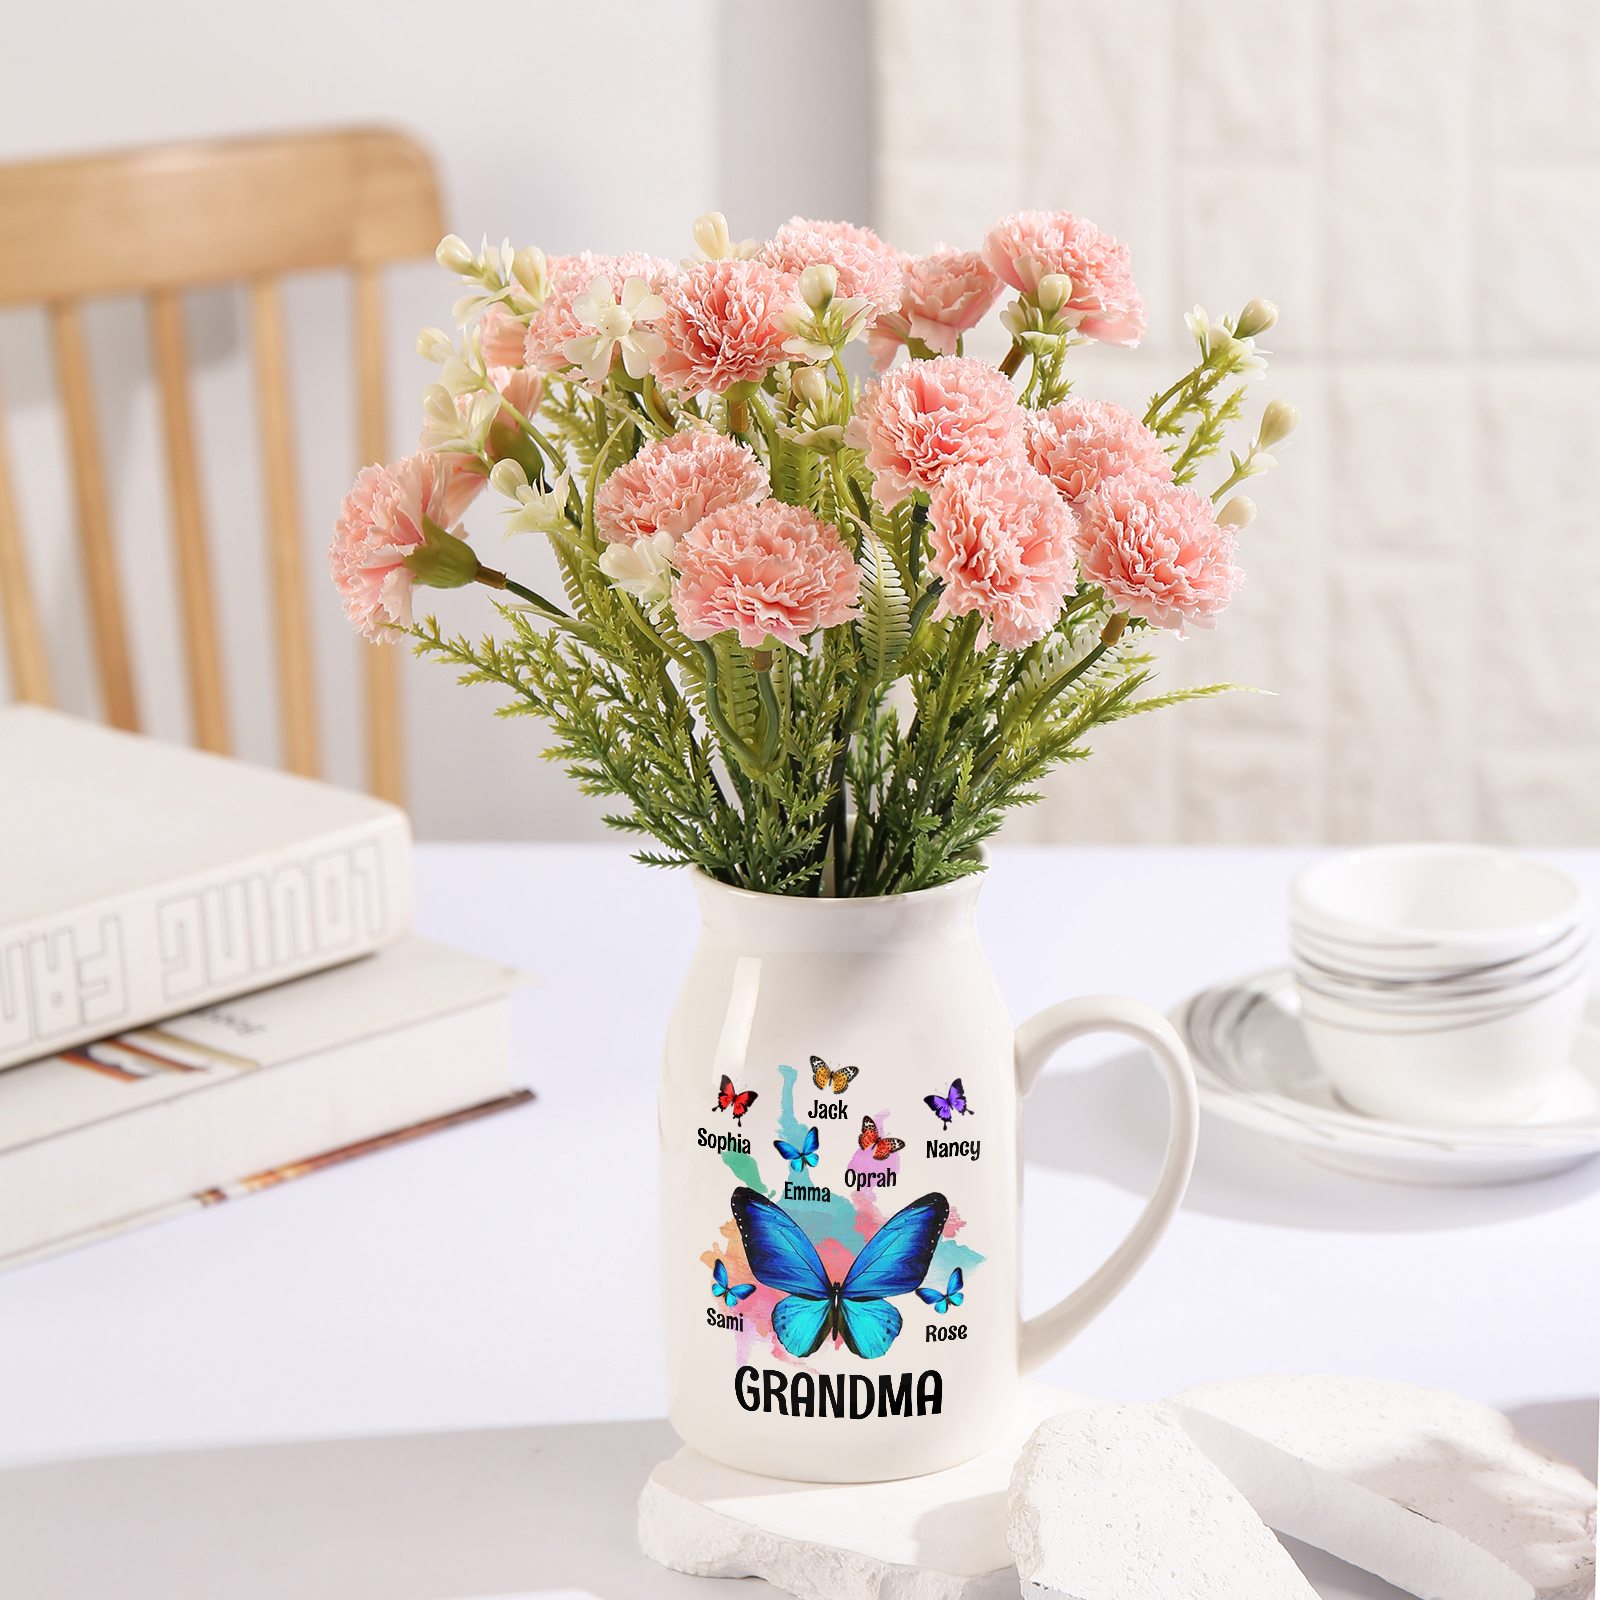 7 Names - Personalized Beautiful Colorful Butterfly Style Ceramic Vase with Customizable Names As a Wonderful Gift For Grandma